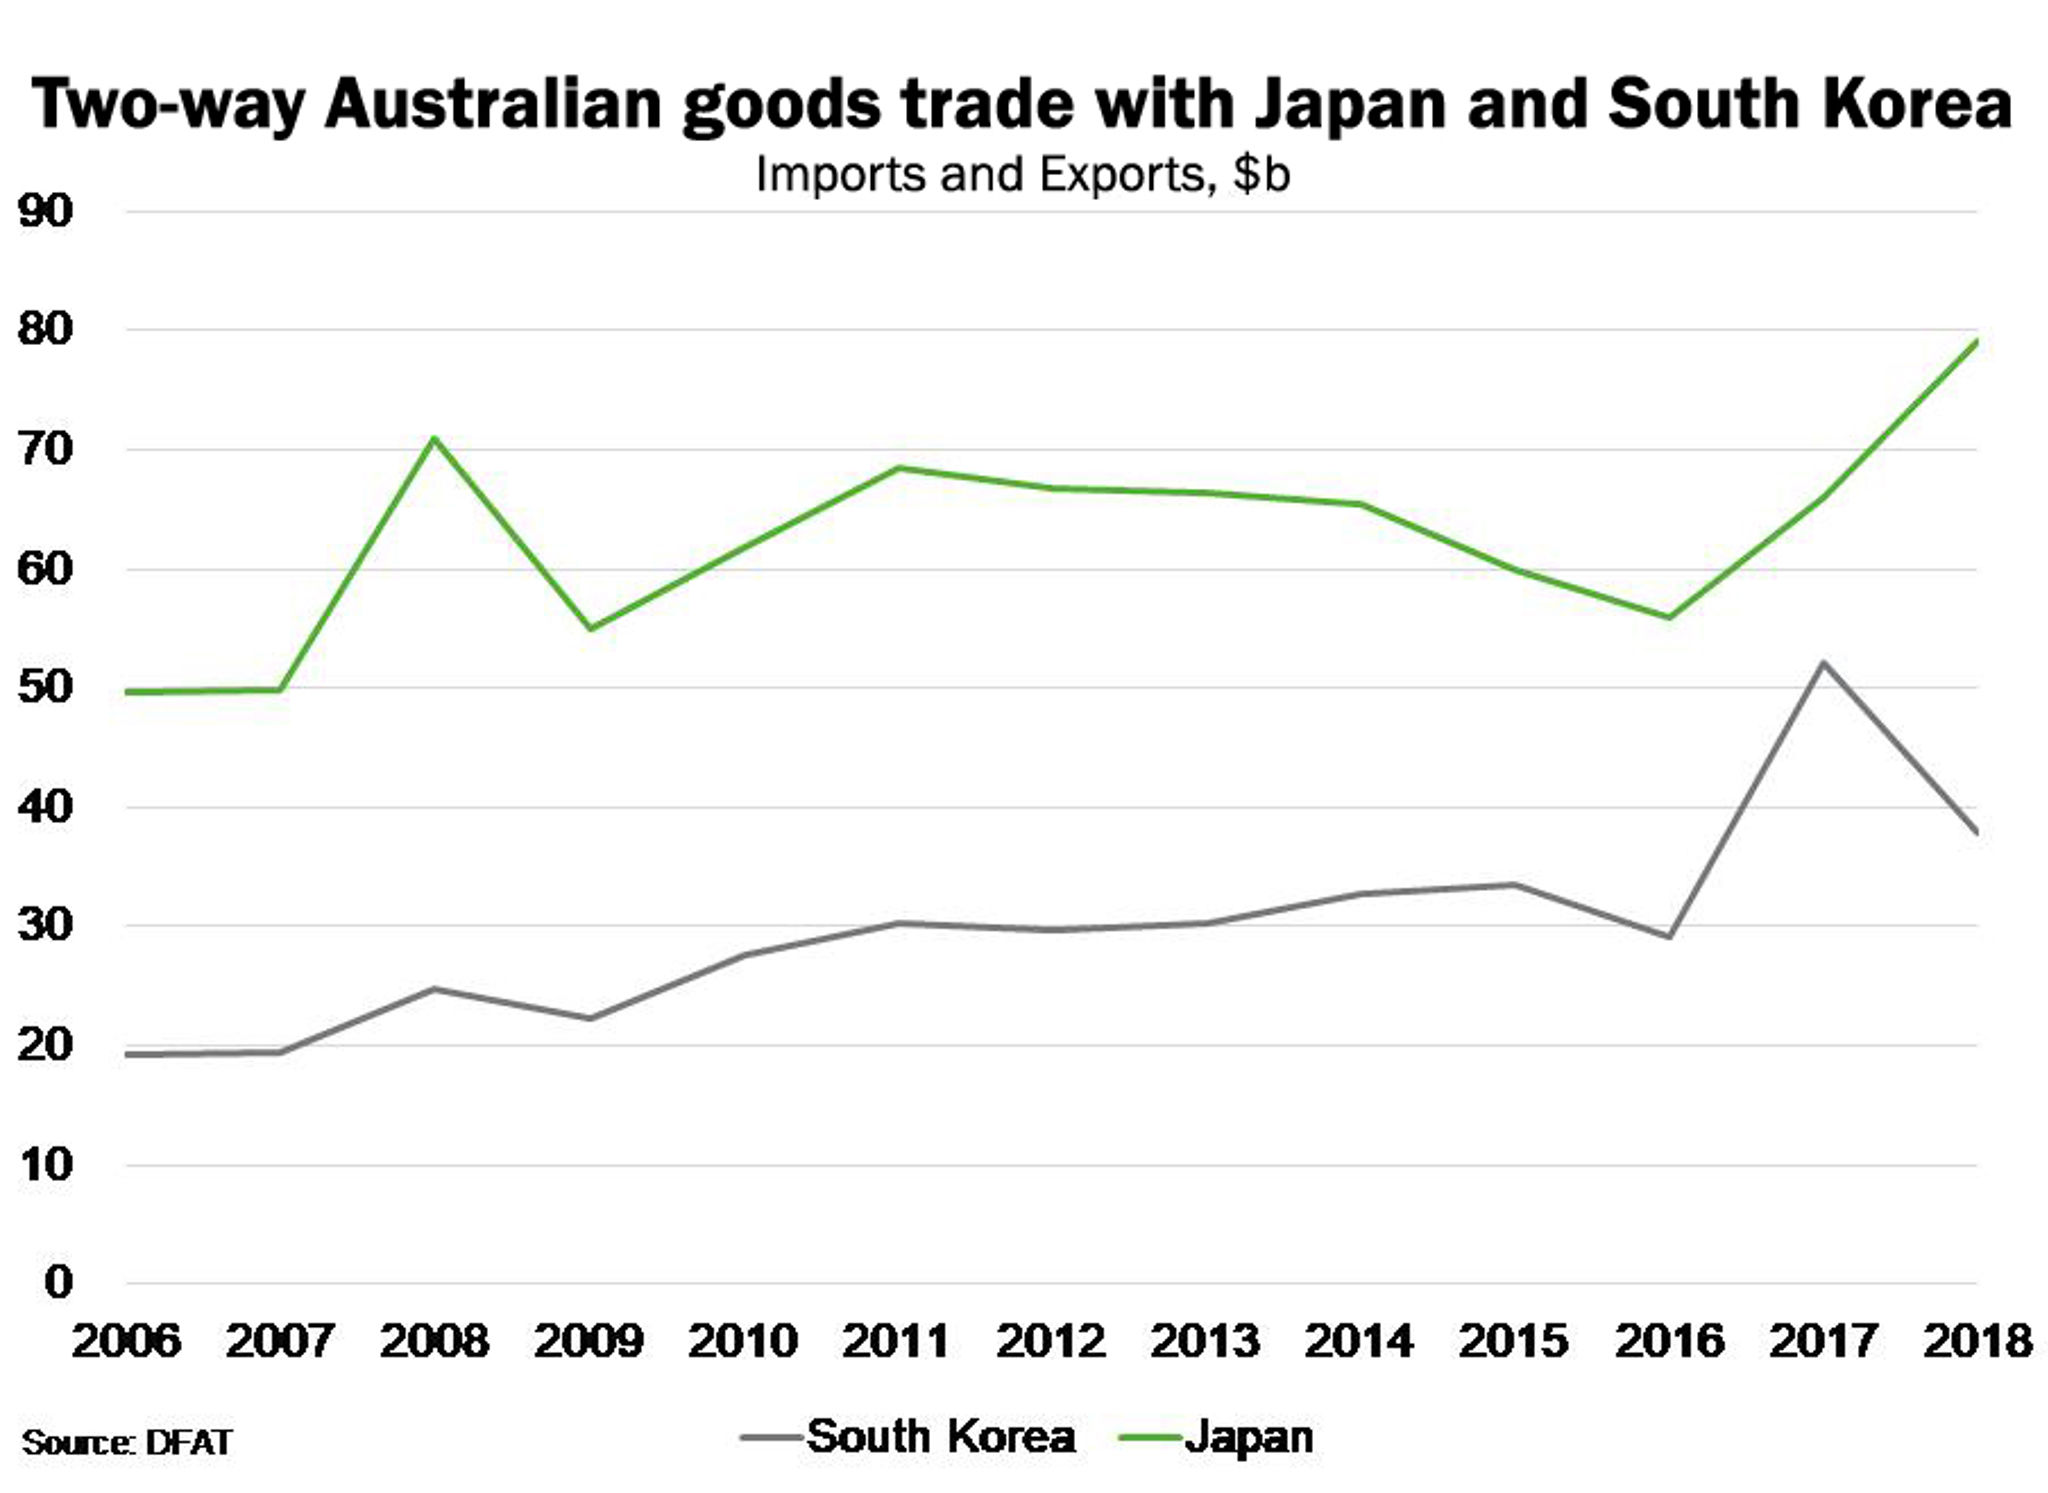 Japan/South Korea – Trade dispute could have broad knock-on effects 